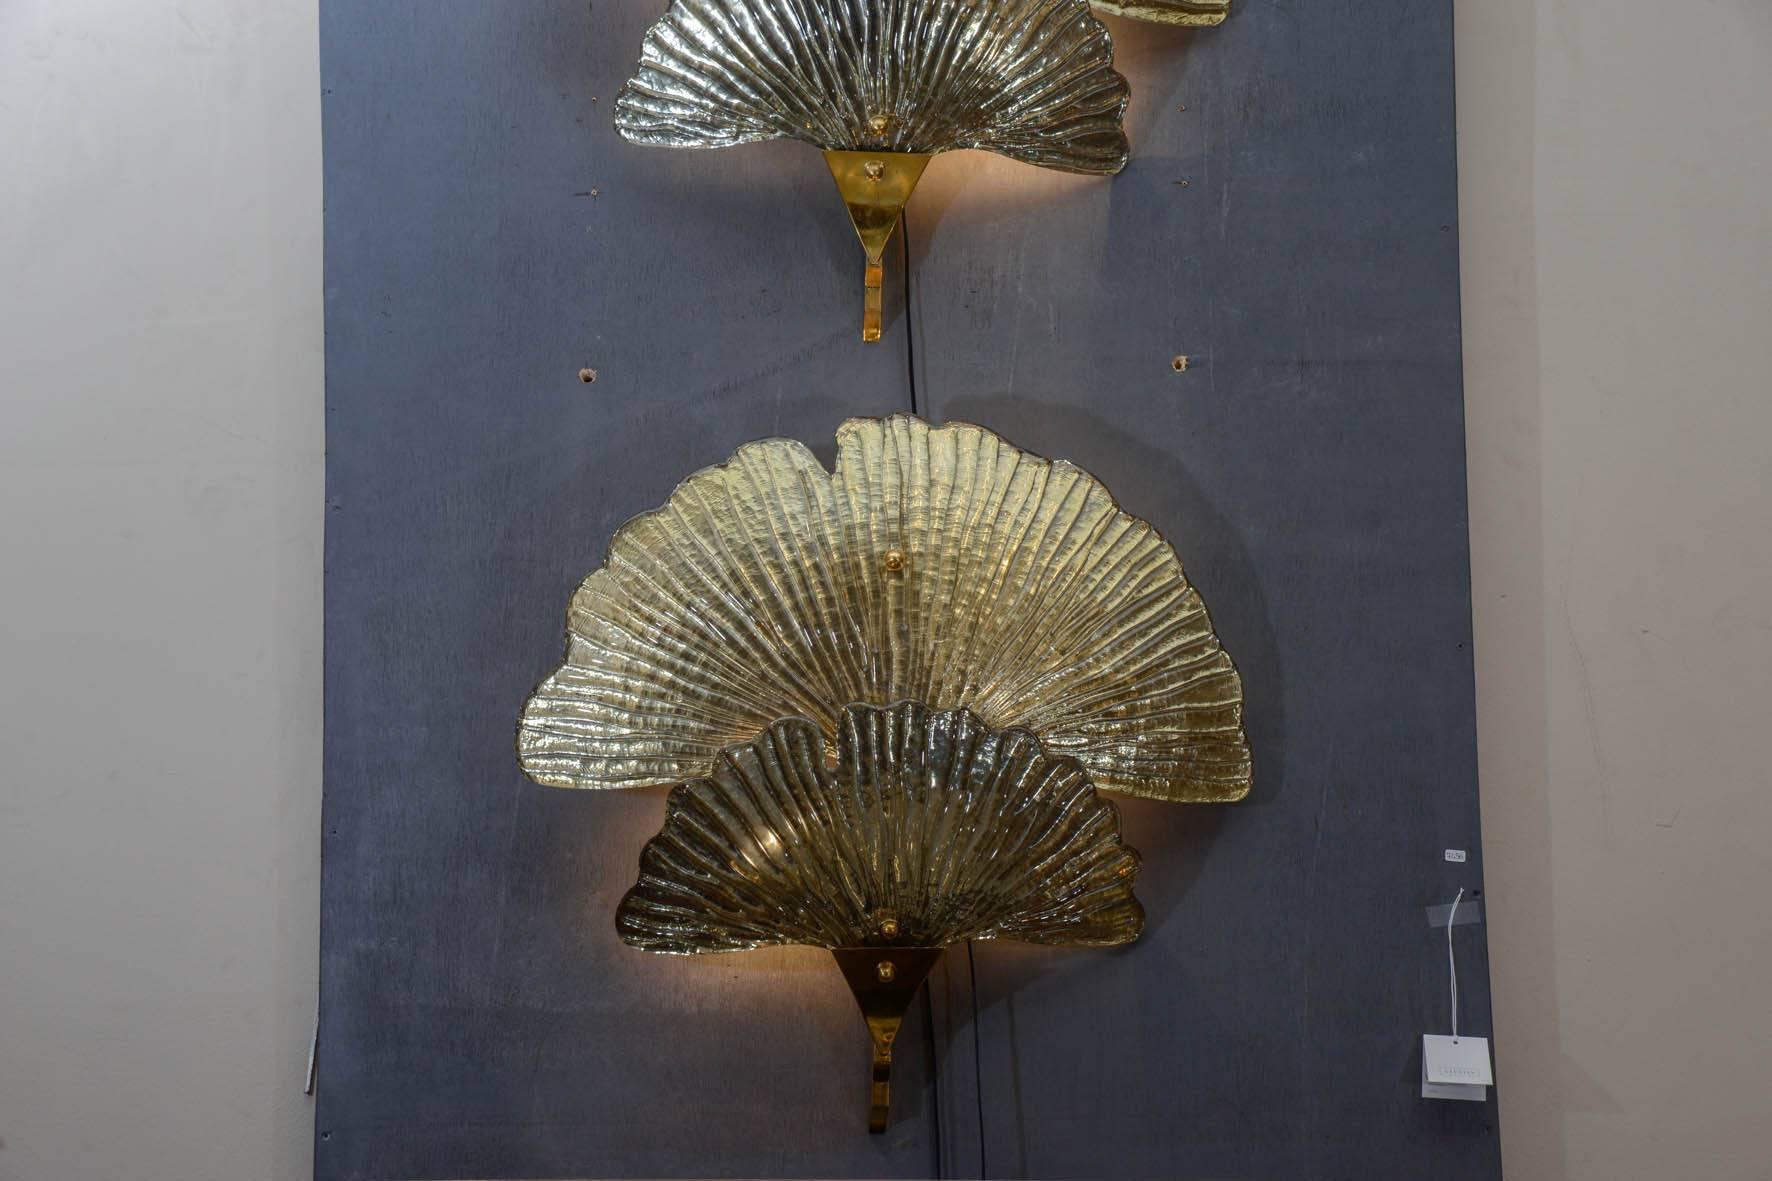 Pair of gilt and silvered Murano glass water lily sconces, four bulbs per sconce.
Four sconces are available.
4400 euros for one pair.